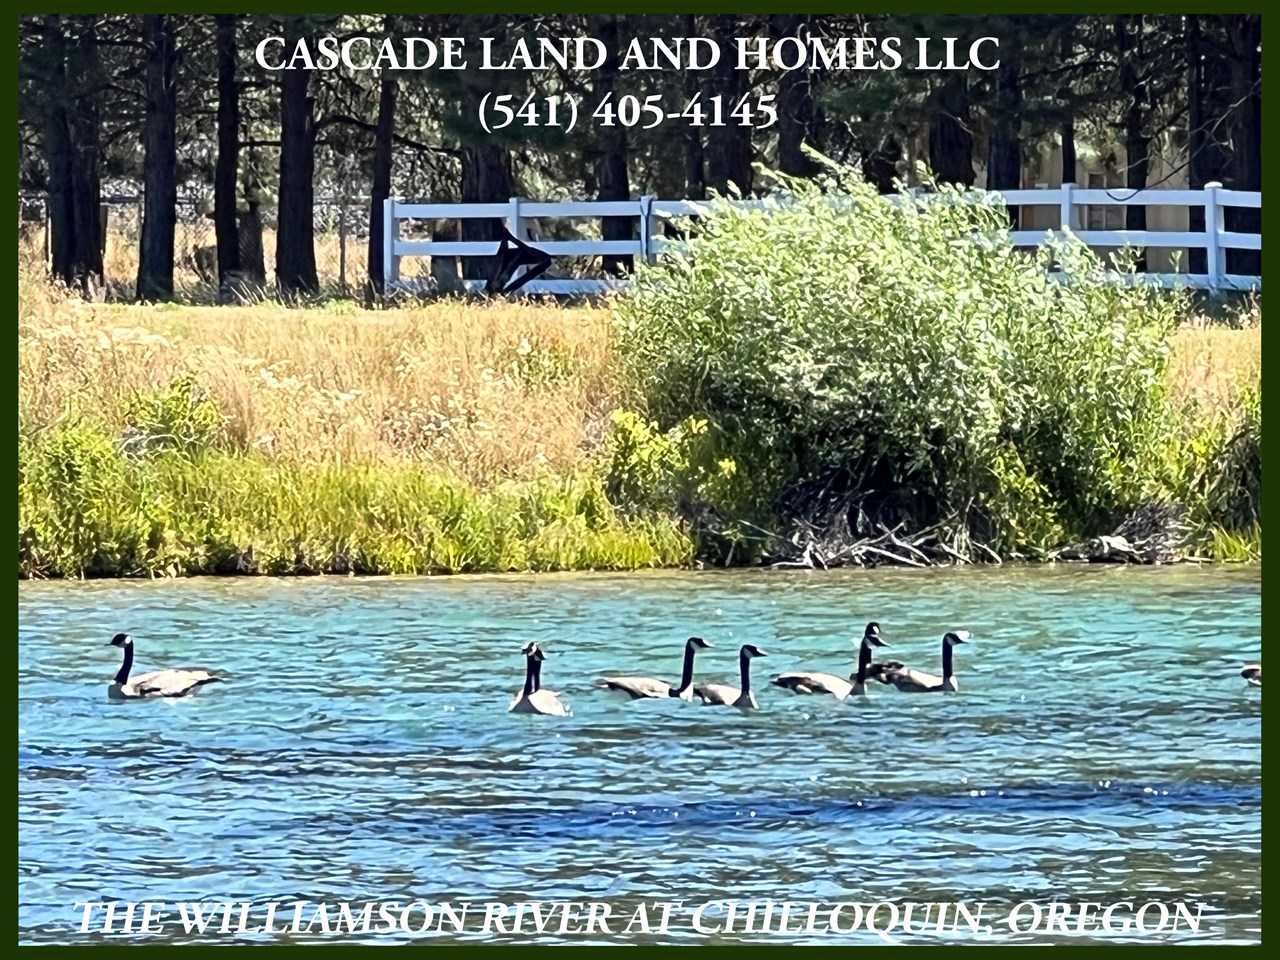 the majestic williamson river is just a very short 1/4 mile walk from the property. these geese were taking advantage of the cool water on this sunny afternoon. you could be doing the same!  wildlife surrounds you here! if you are looking for a quieter lifestyle, but still not too far from the amenities of a nearby town, this is a great place. it's quiet, peaceful, and absolutely gorgeous here! you could walk down to the river's edge every morning!